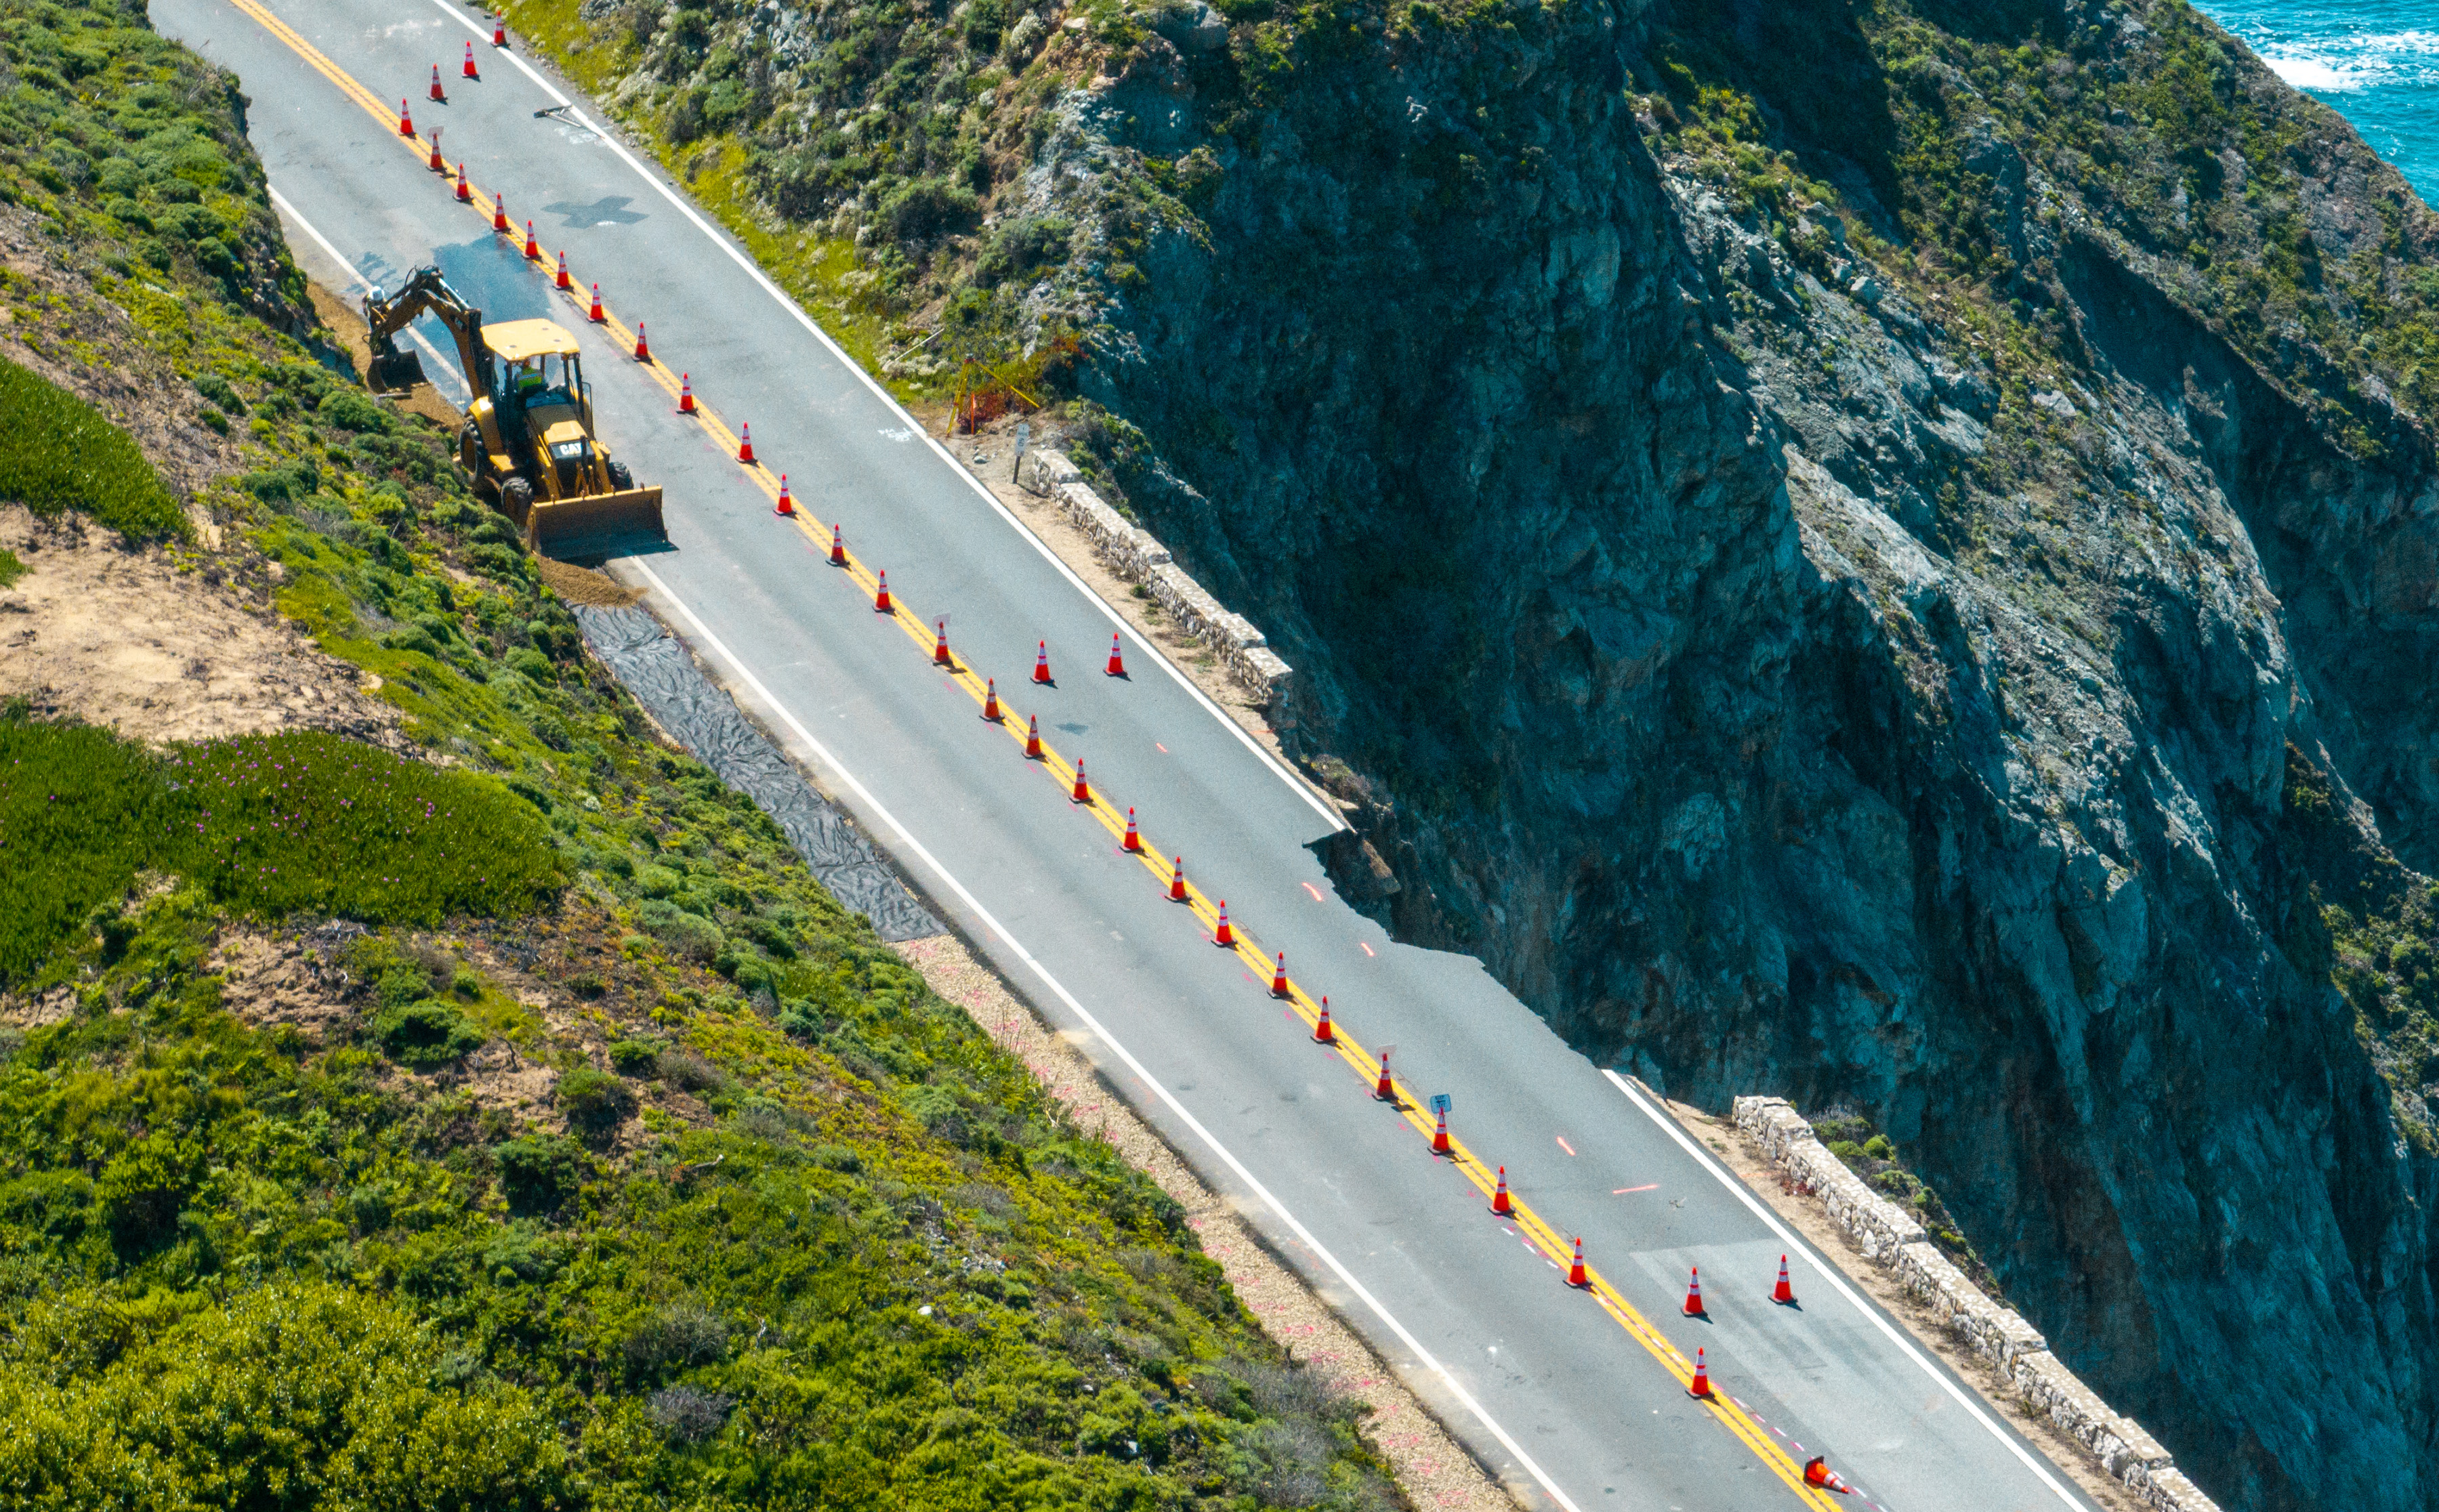 A coastal road with traffic cones and a yellow excavator working near a steep cliff overlooking a blue sea.